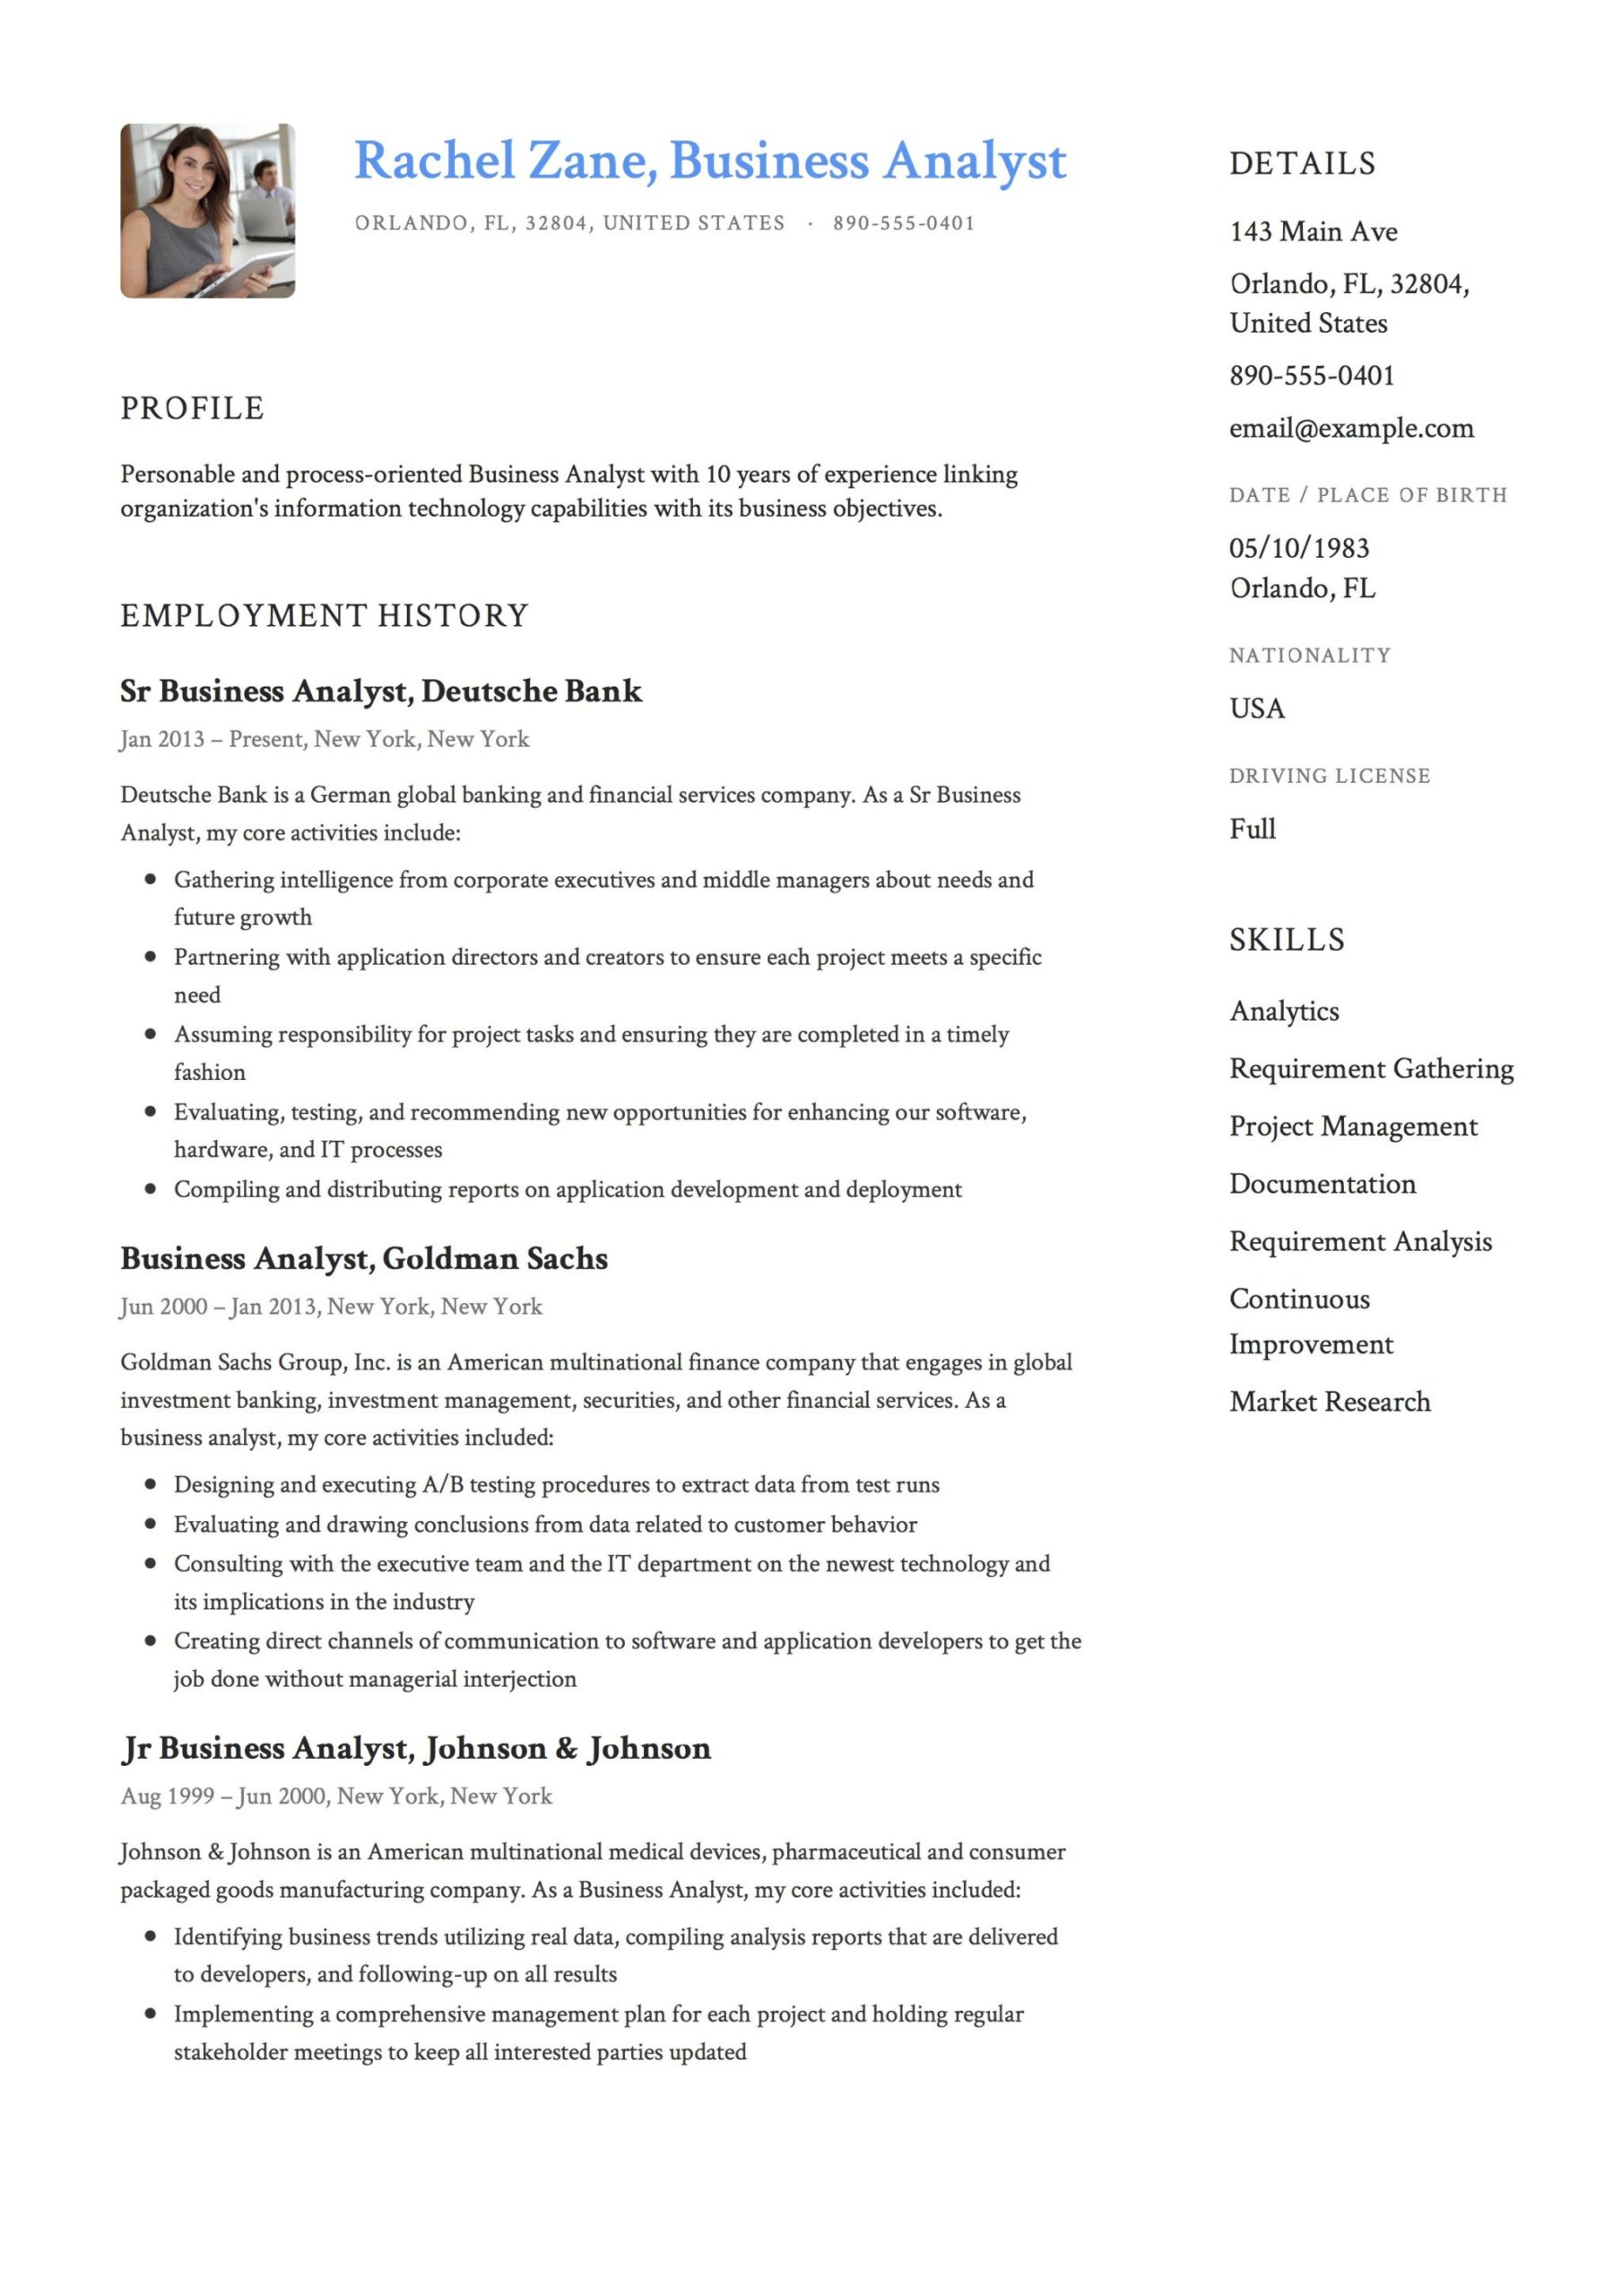 Sample Resume for Business Analyst In Finance Business Analyst Resume Examples & Writing Guide 2022